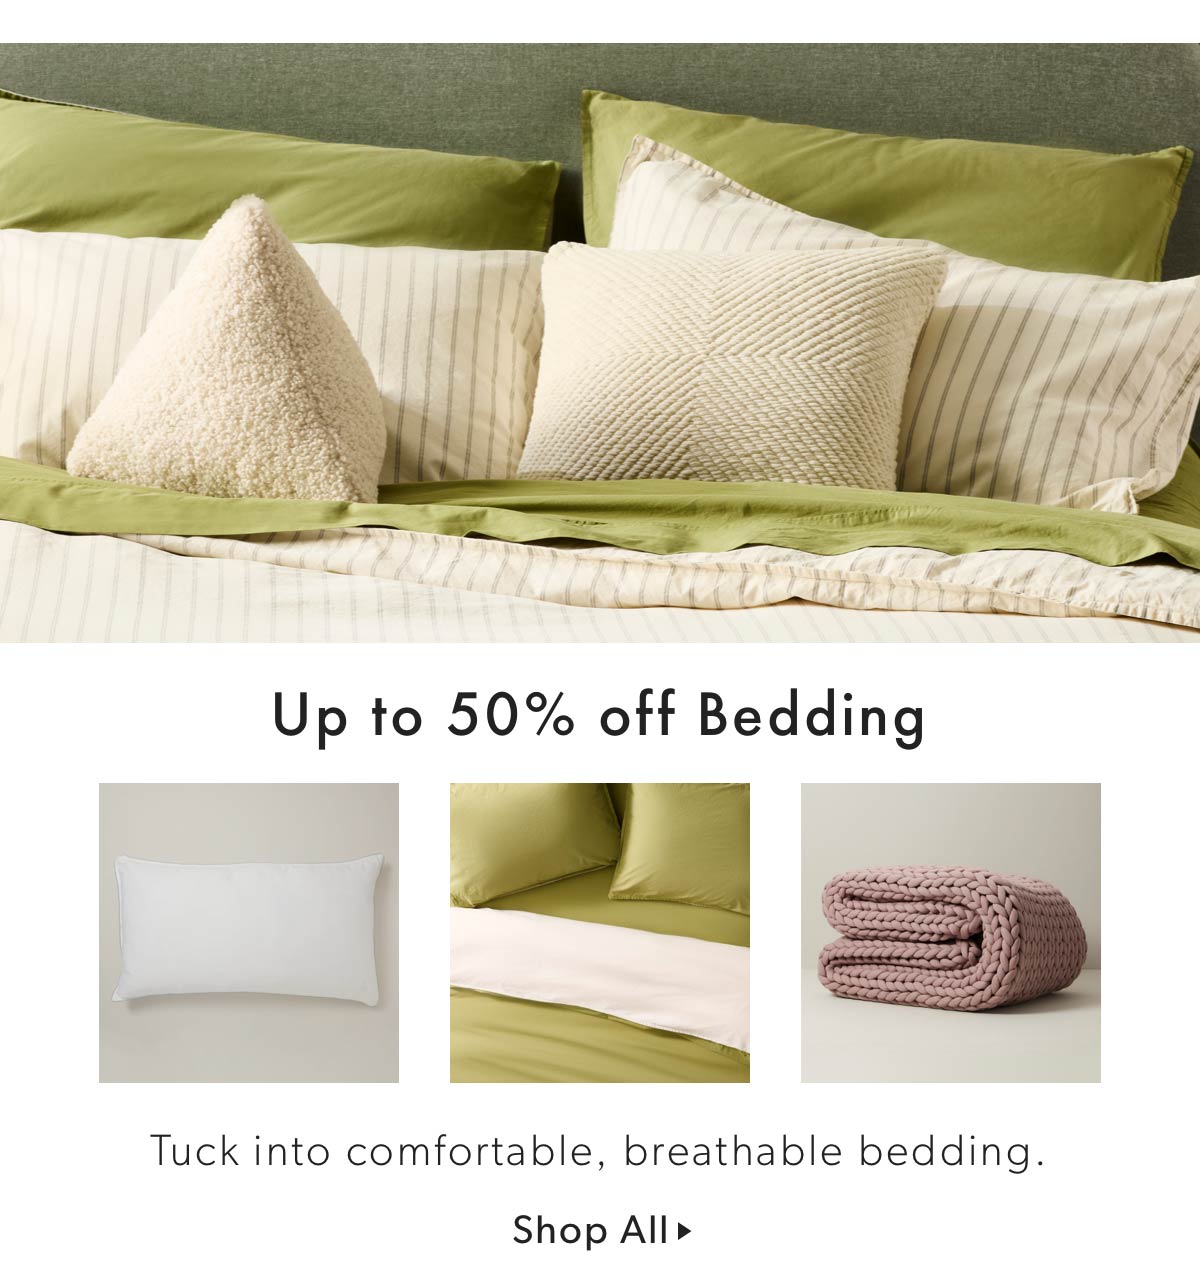 Up to 50% off Bedding